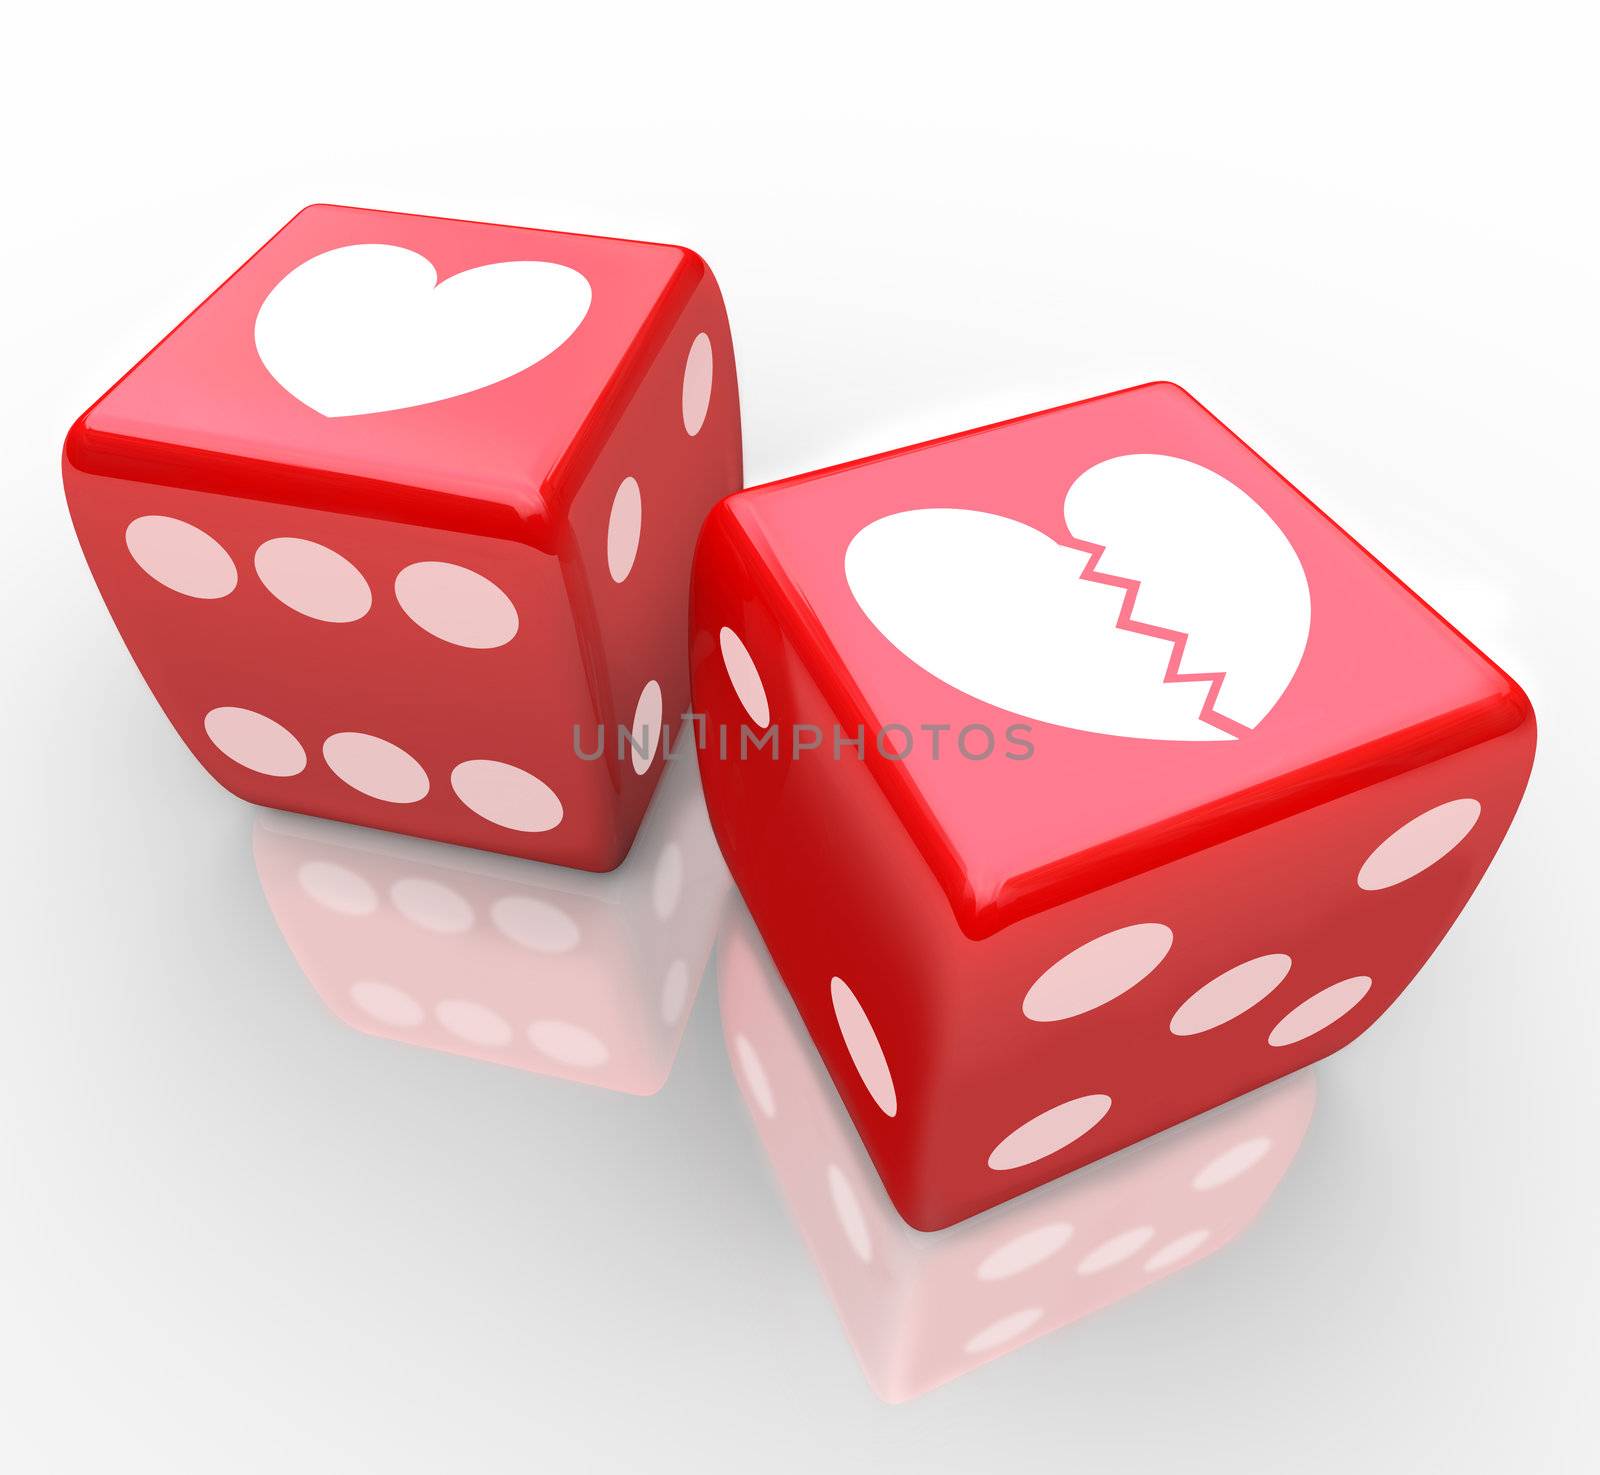 Two hearts on dice, one broken to symbolize the risk in love, dating, relationships, marriage and divorce in the game of sharing your heart with someone elese